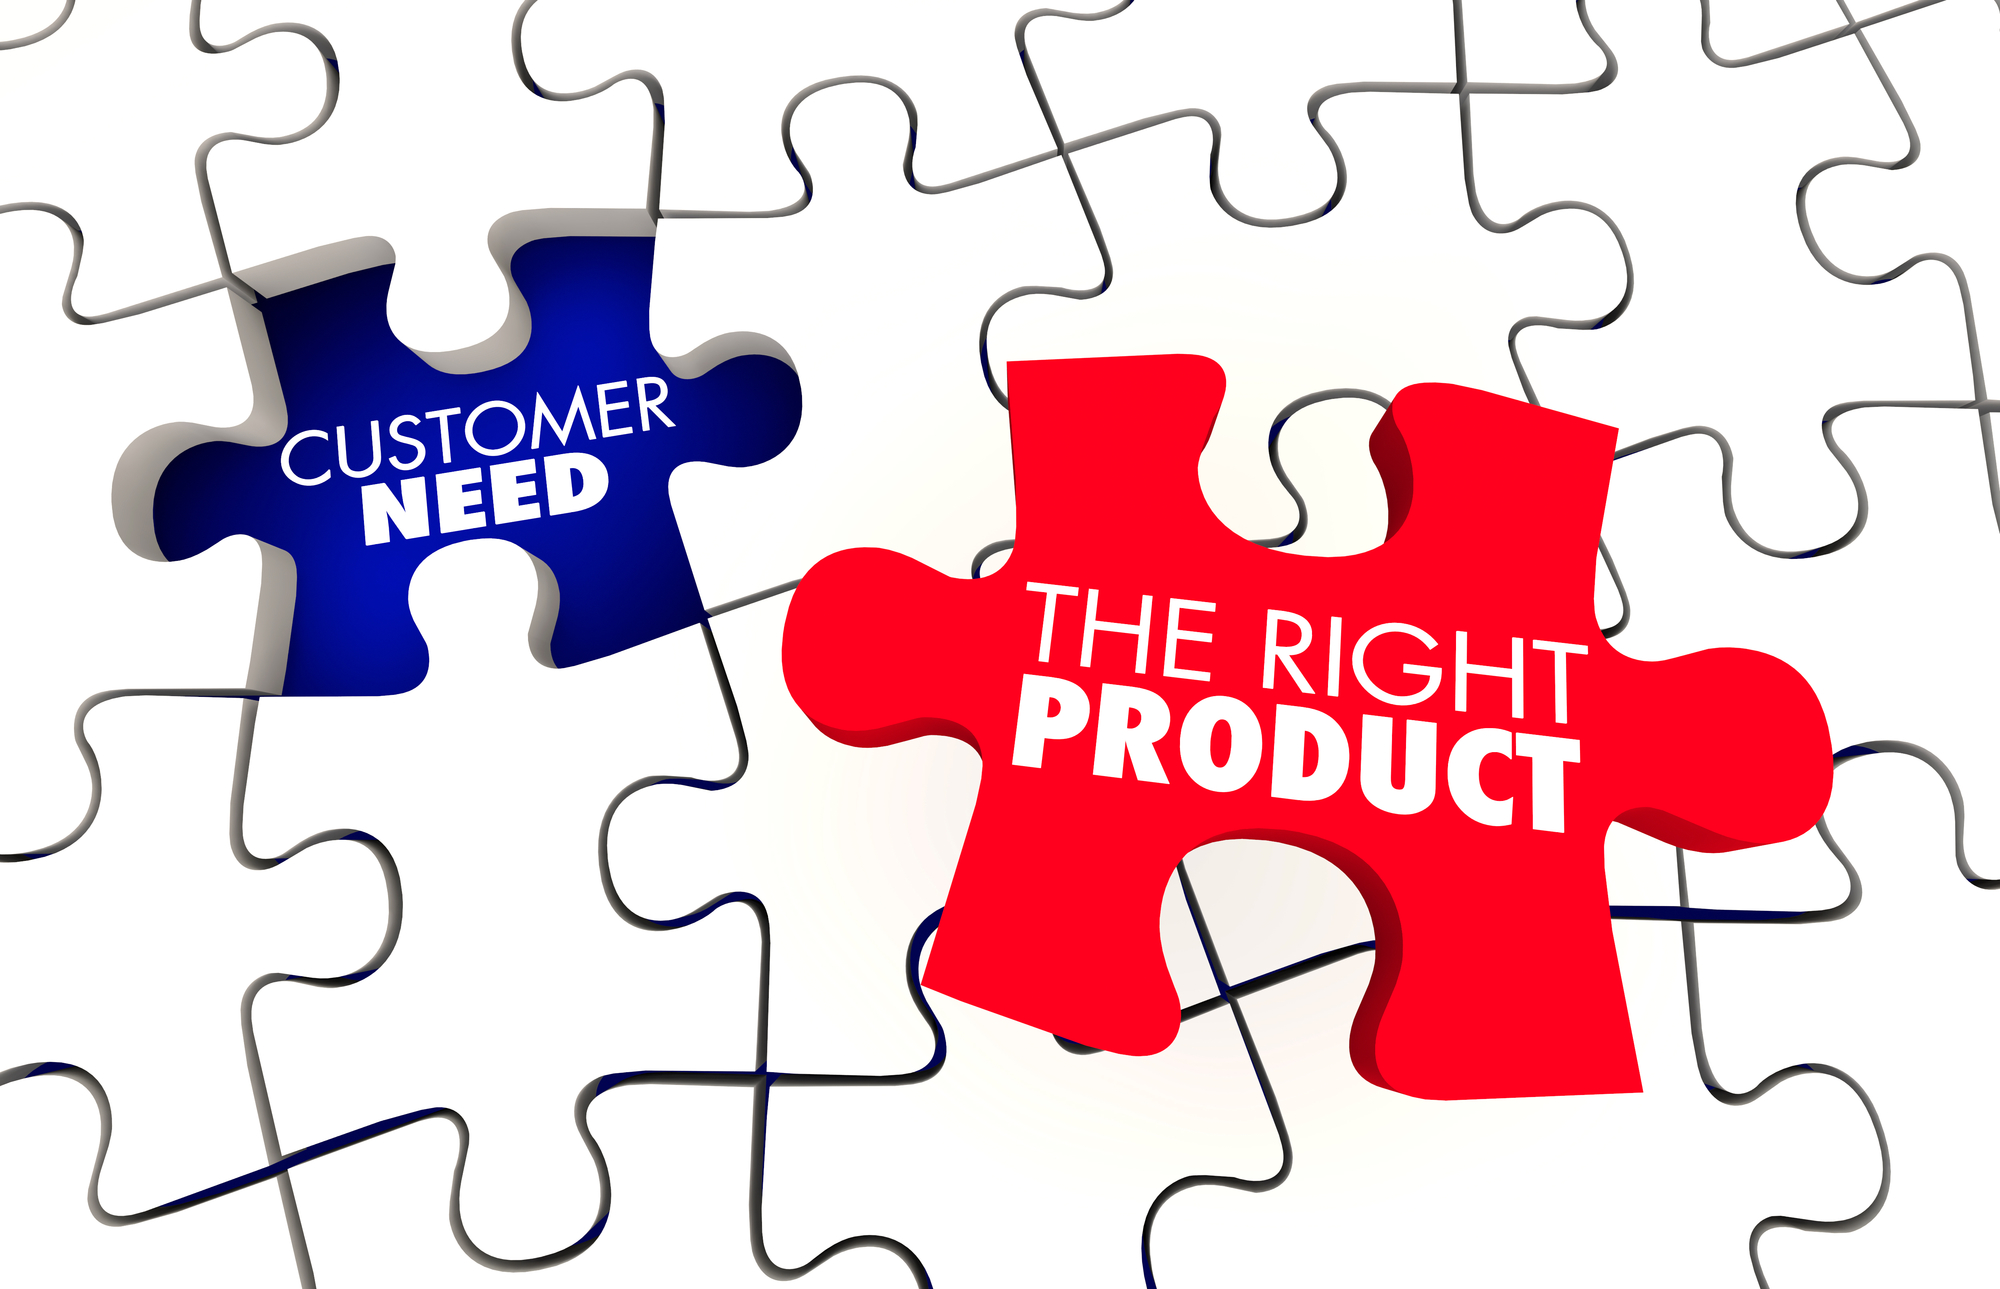 Are products of high. Customer needs. Products and customers. Right product. Customer rights.